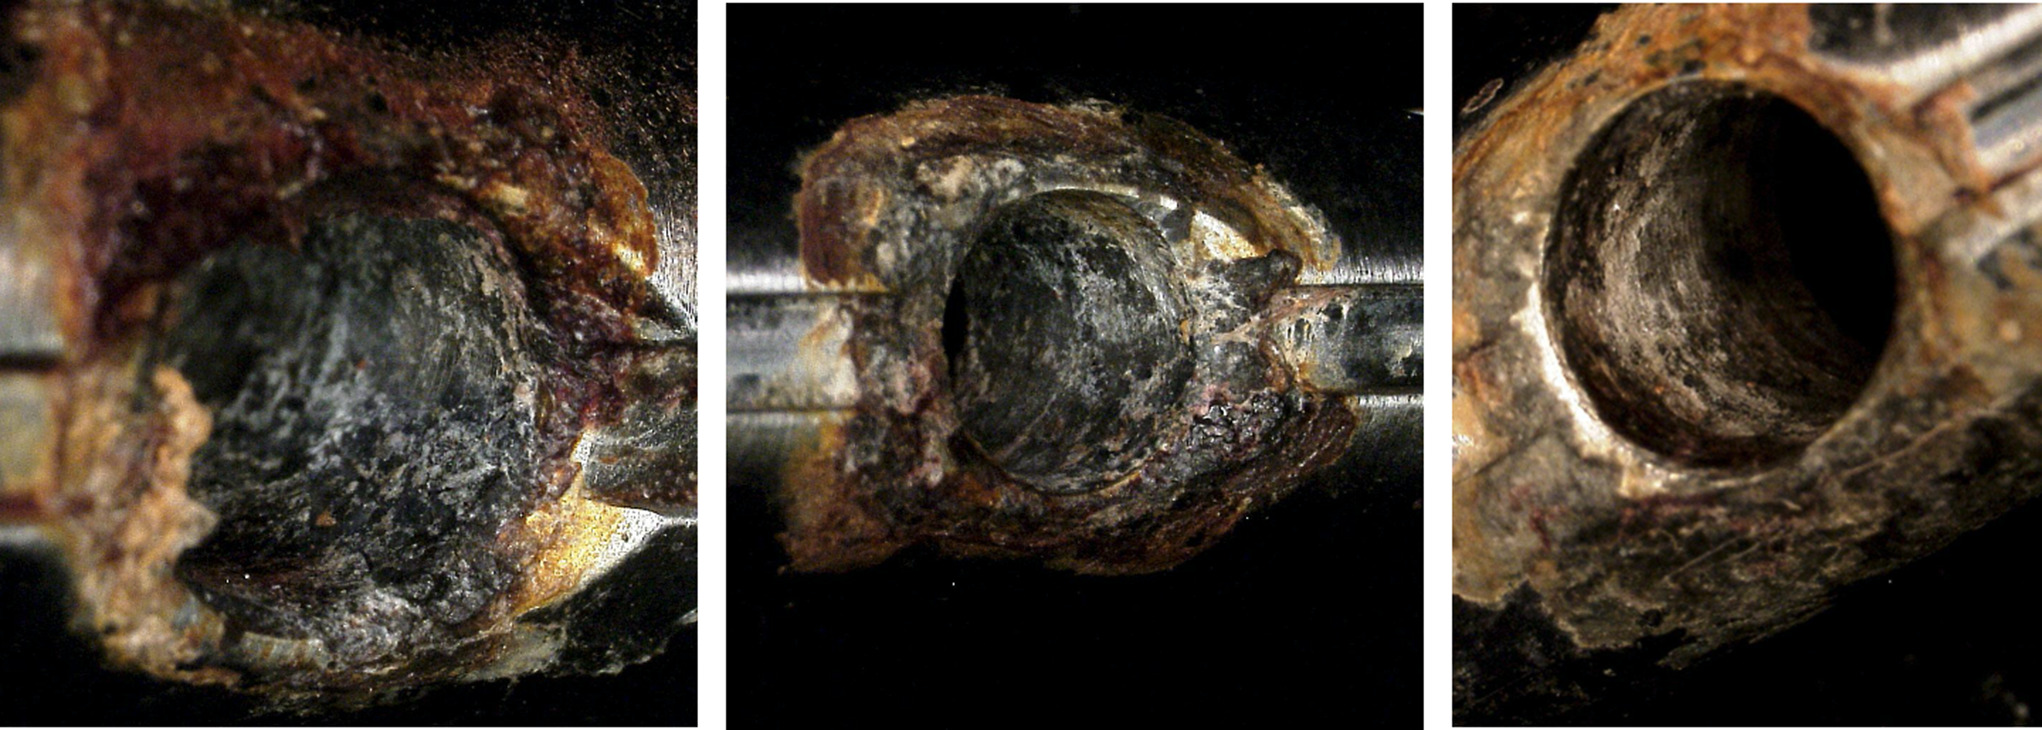 Fig. 7 
            Microscopic images showing evidence of severe corrosion (Goldberg score 4) within the nail-screw junction holes. This was observed in ten out of the 54 screw holes examined.
          